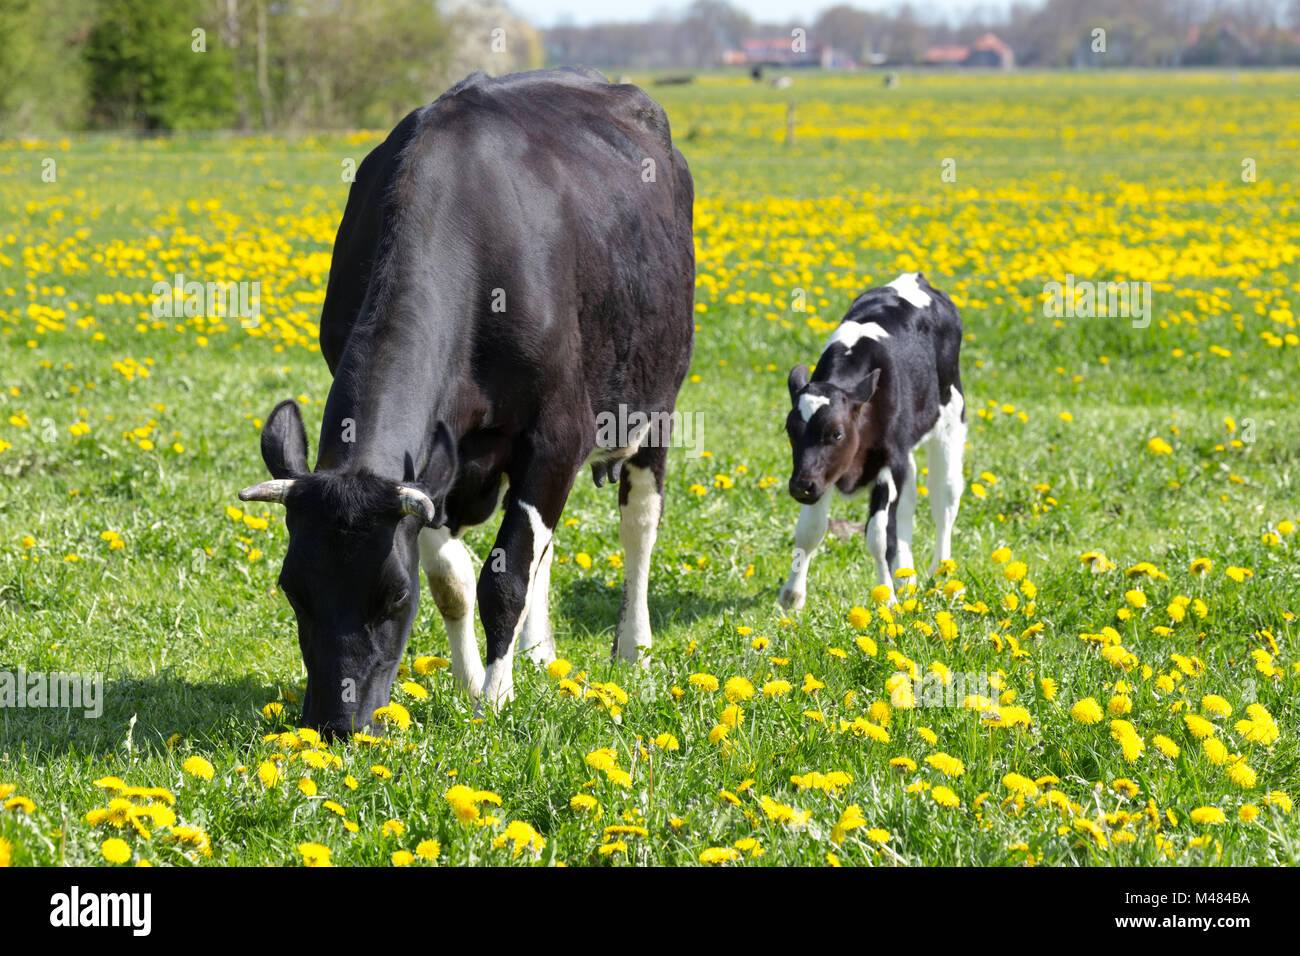 Spotted mother cow and calf in meadow with yellow dandelions Stock Photo